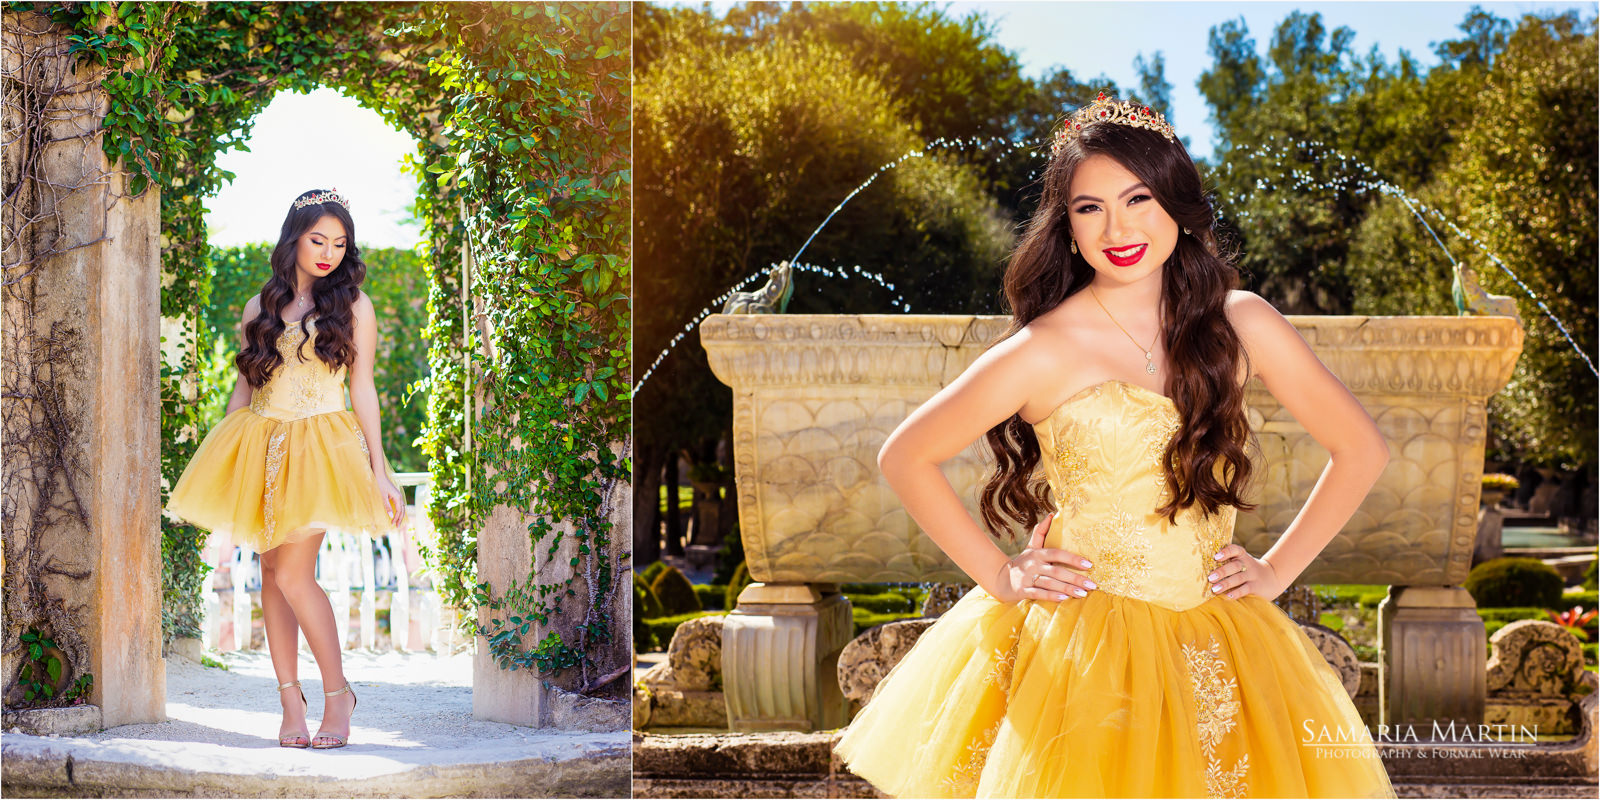 Quinceanera Photography, rent of quinceaneras dresses, quince photoshoot, Miami dress rental, Samaria Martin photography in Miami